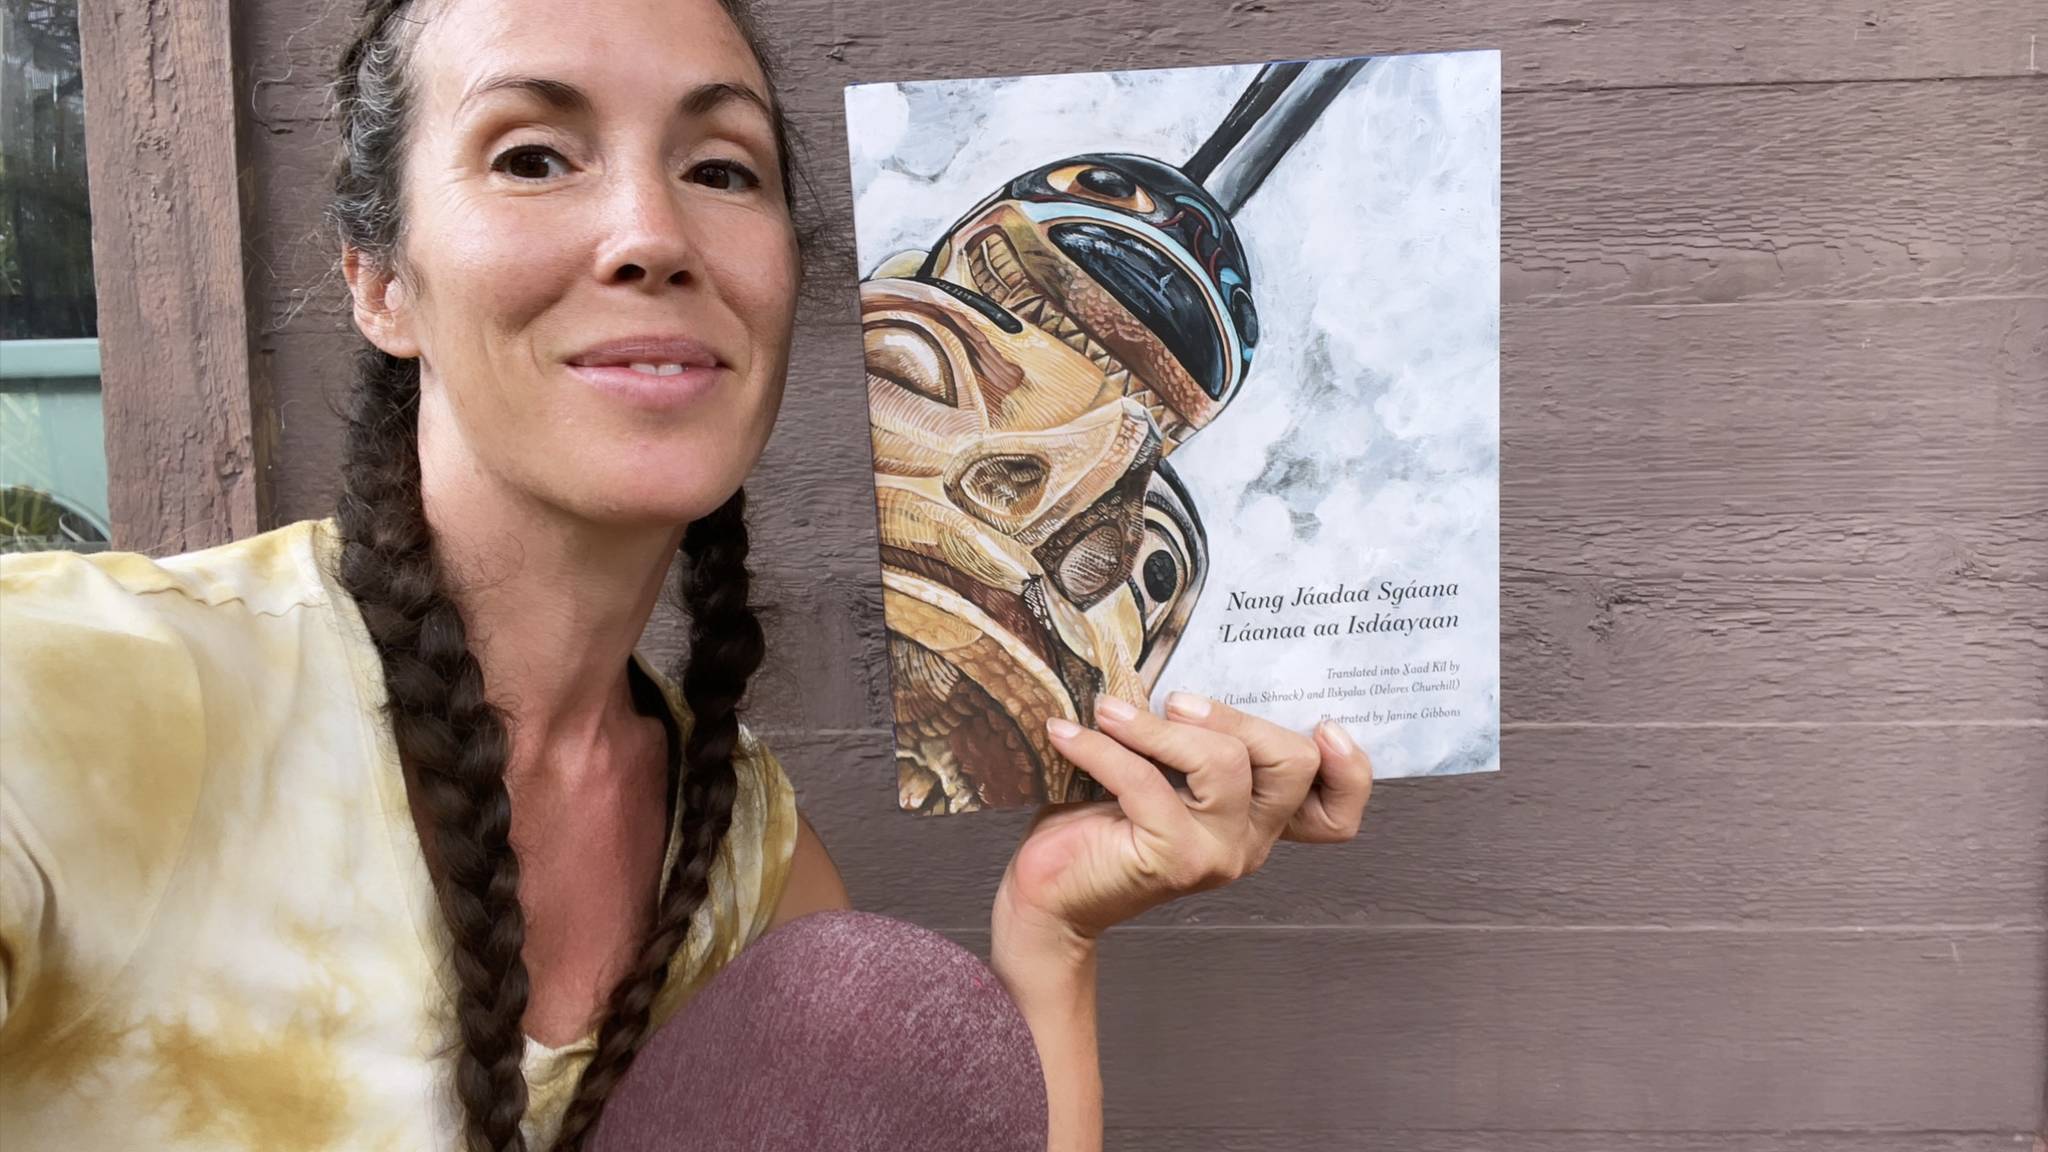 Courtesy photo / Janine Gibbons
Haida artist Janine Gibbons poses with the book she illustrated, the Sealaska Heritage Institute’s first children’s book in the Haida language Xaad Kíl, a translation of the traditional story “The Woman Carried Away by Killer Whales.”